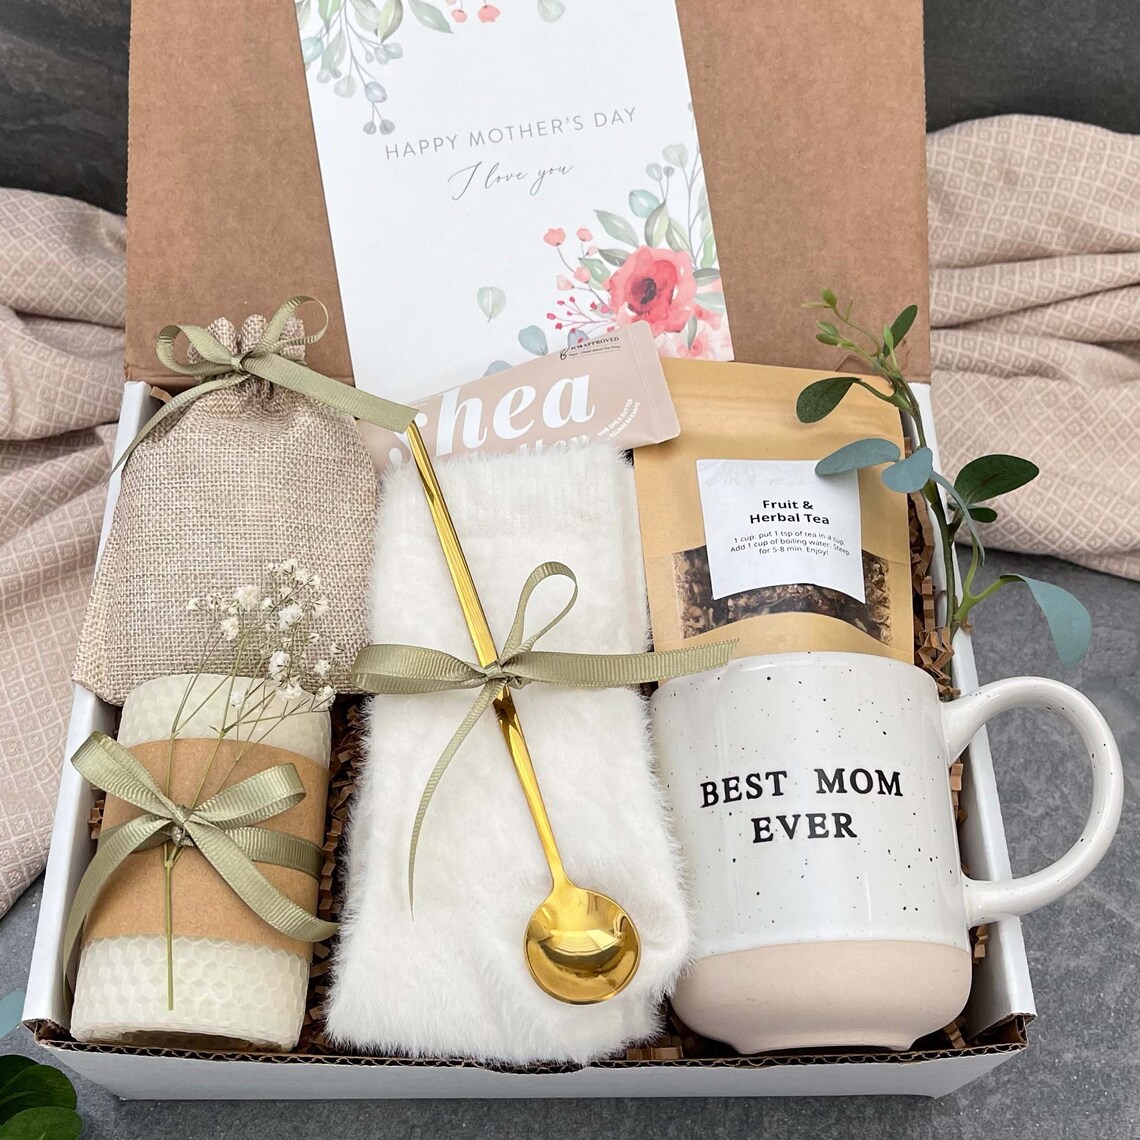 Gift for Mom for Mother's Day | Gift Box for Women, Gift for Her, Gift Bakset for Mom, Care Package for First Time Mom, Best Friend, Sister - Etsy